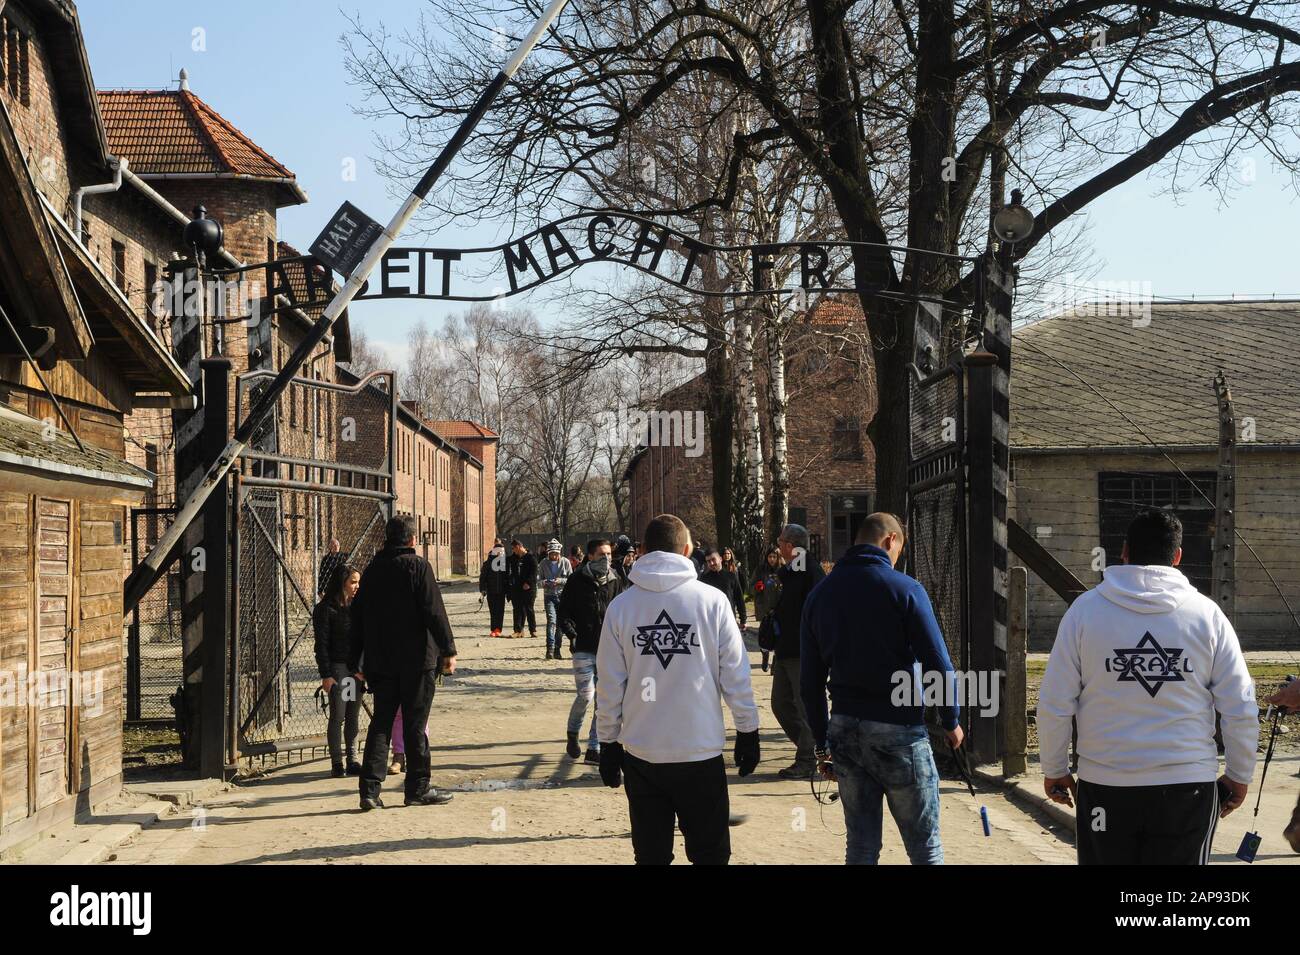 16.03.2015, Auschwitz, Poland, Europe - Entry gate to the former concentration camp Auschwitz I (main camp) with its slogan Arbeit macht frei. Stock Photo